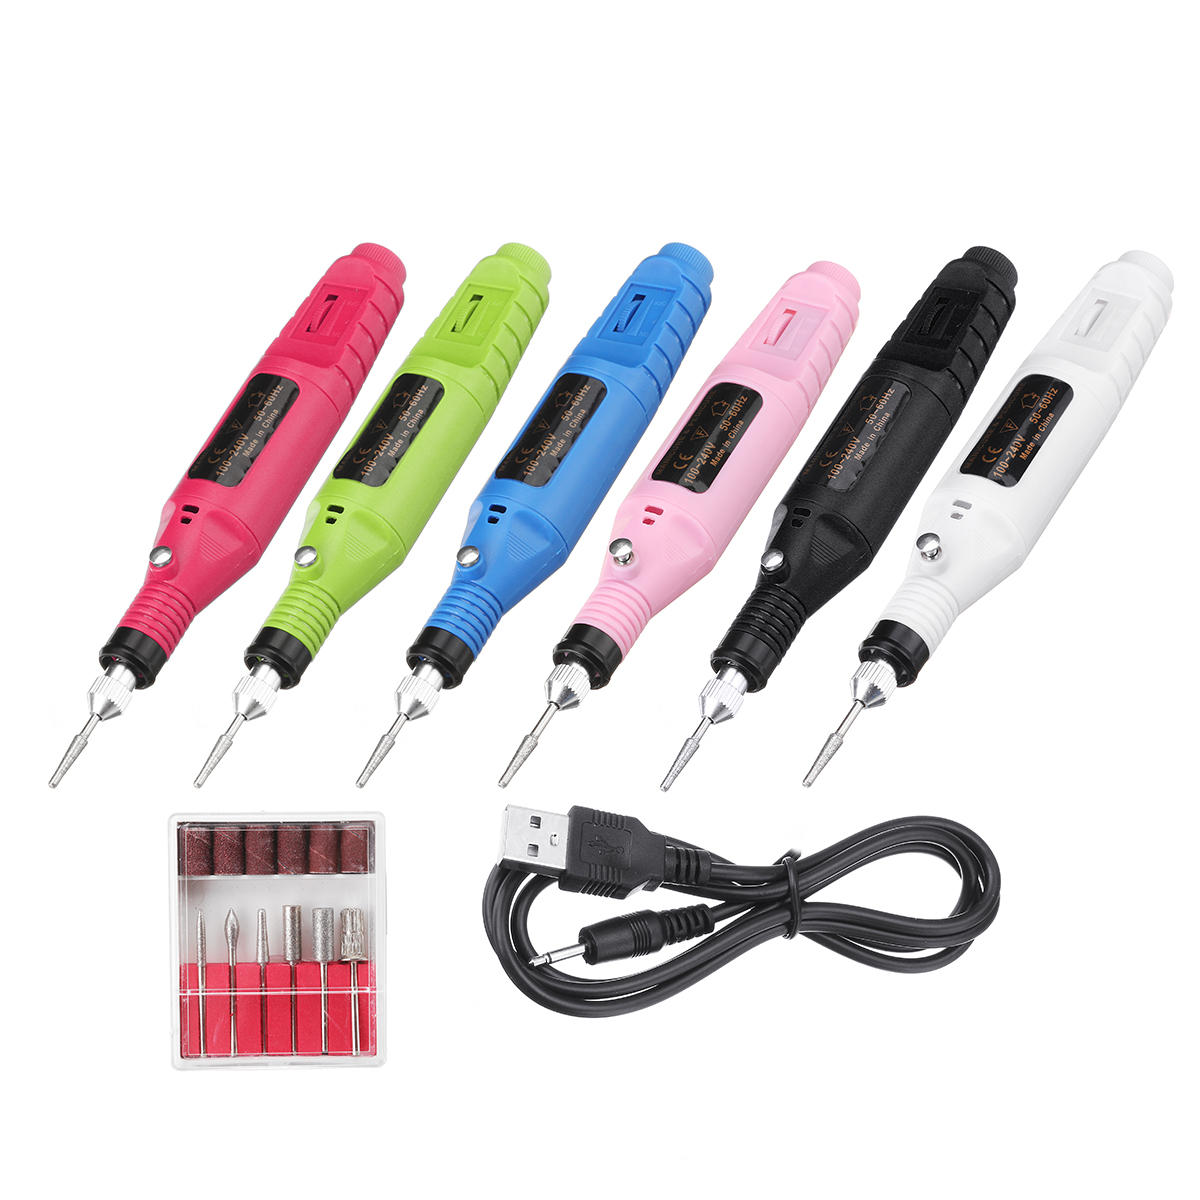 USB Charging Electric Nail Grinder Drill Portable Manicure Pedicure Nail Machine with 6 Grinding Heads